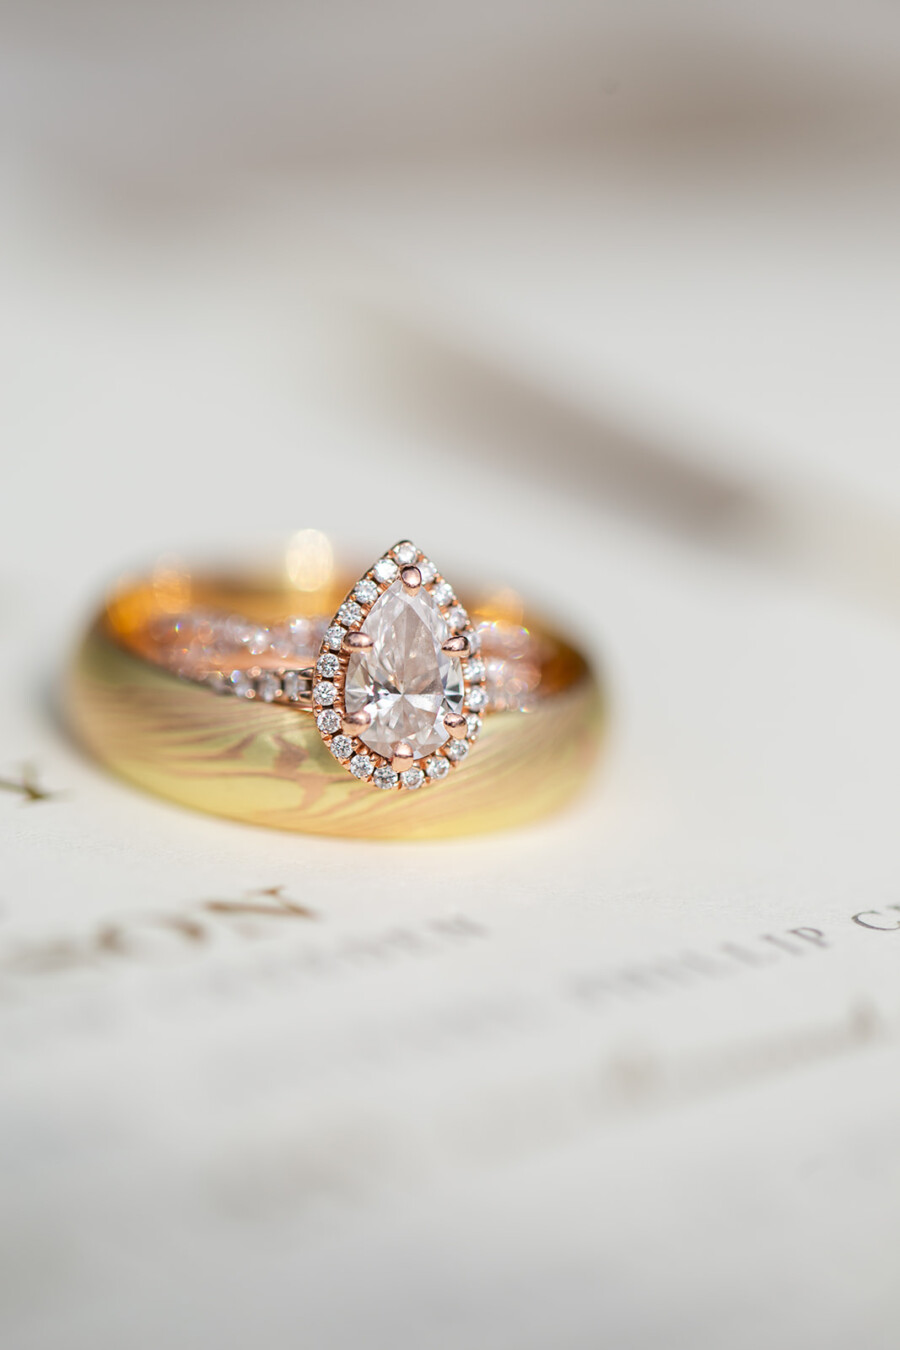 Pear-shaped engagement ring